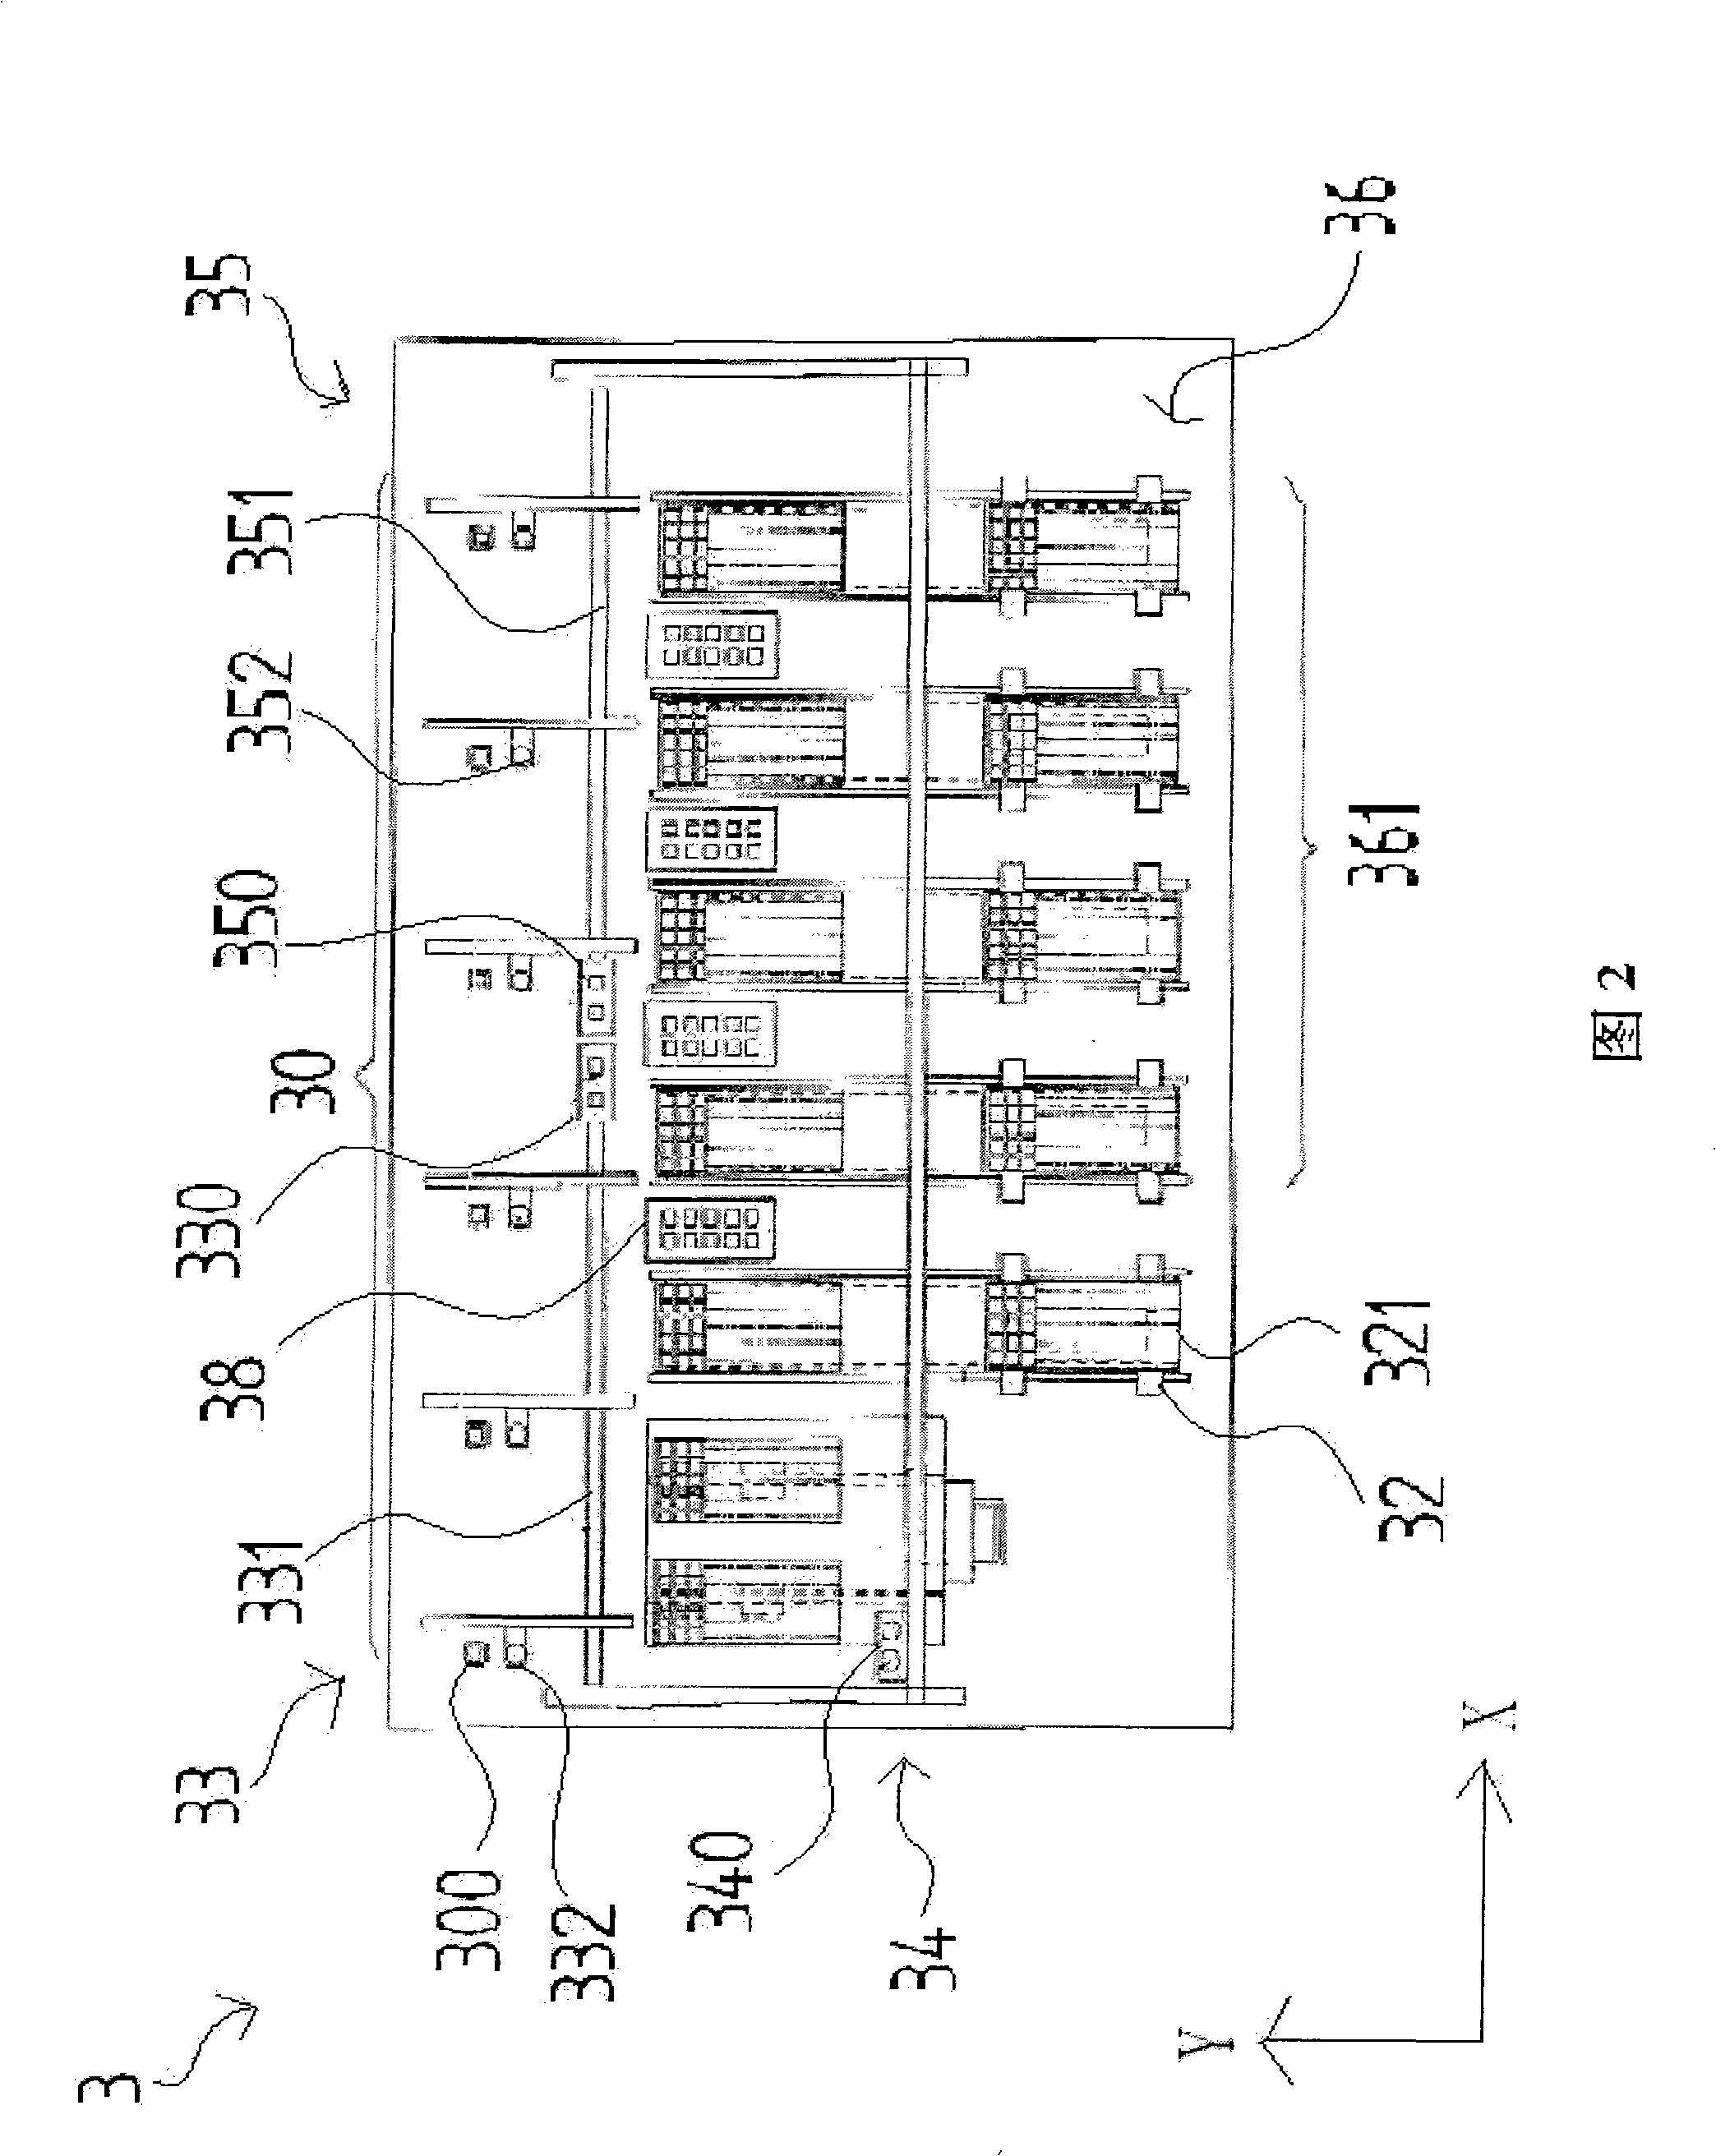 Multi-test seat test station having in-turn arranged feeding section, test section and discharging section